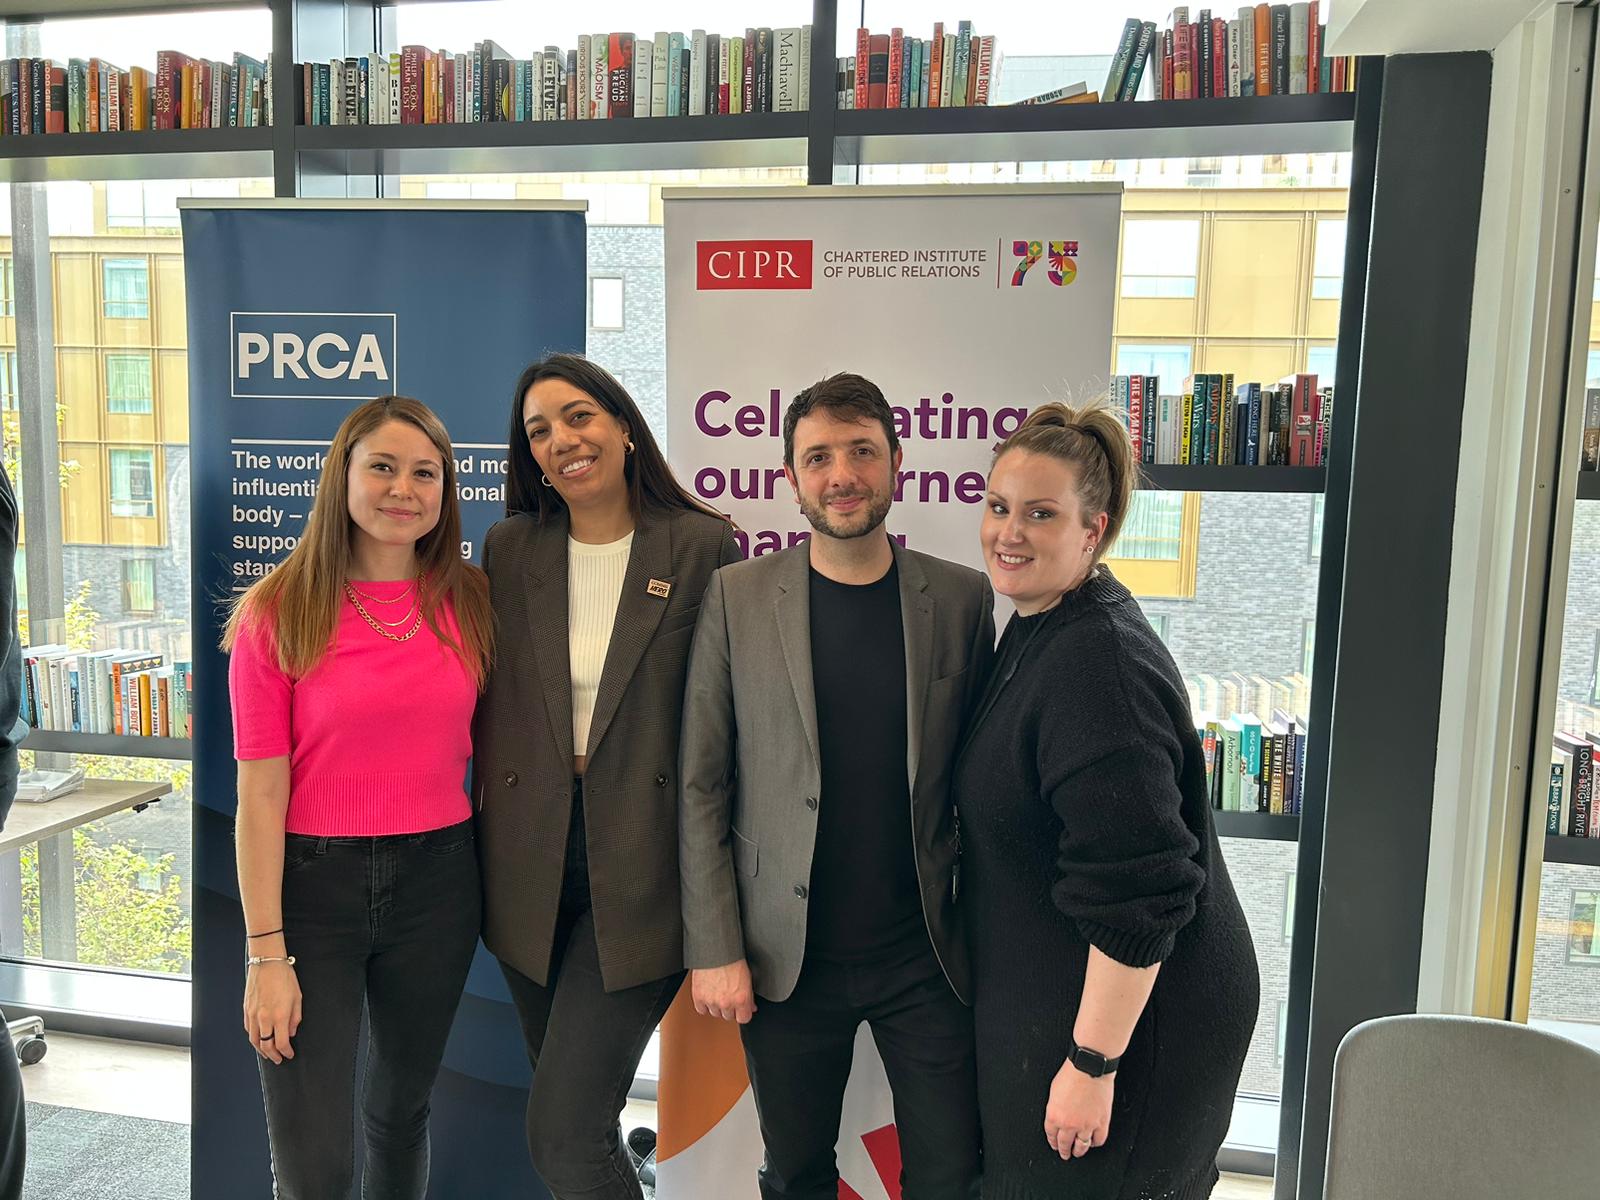 Four people stood smiling at the camera in front of a book case and signs from CIPR and PRCA